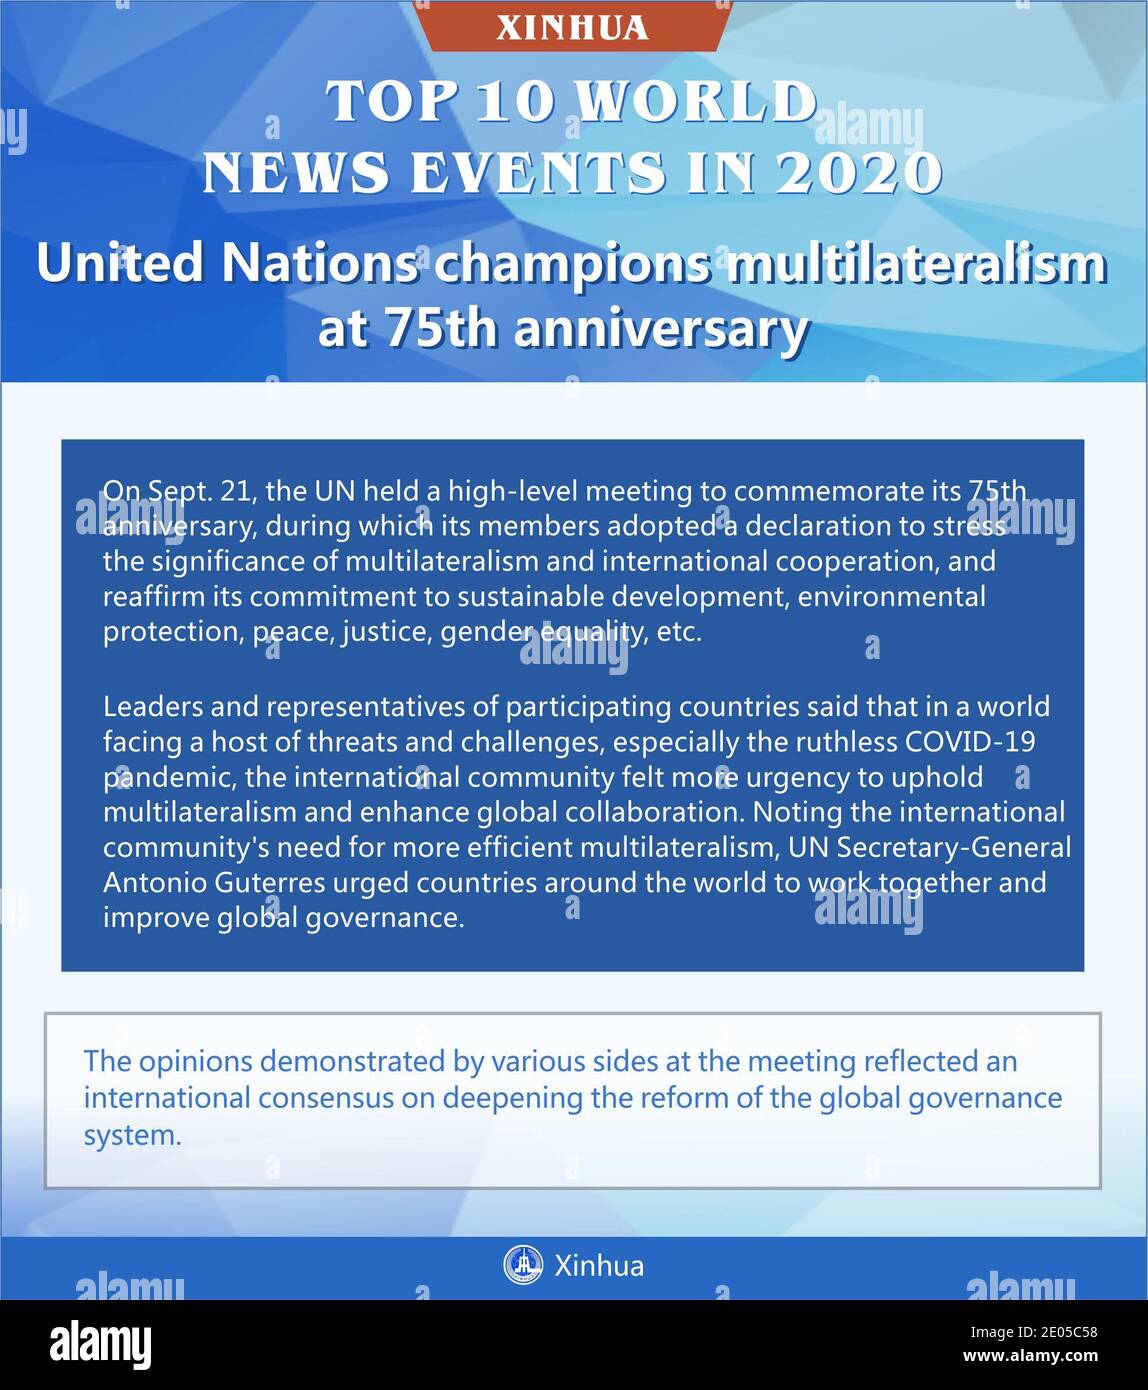 Beijing, China. 30th Dec, 2020. United Nations champions multilateralism at 75th anniversary Credit: Shi Manke/Xinhua/Alamy Live News Stock Photo